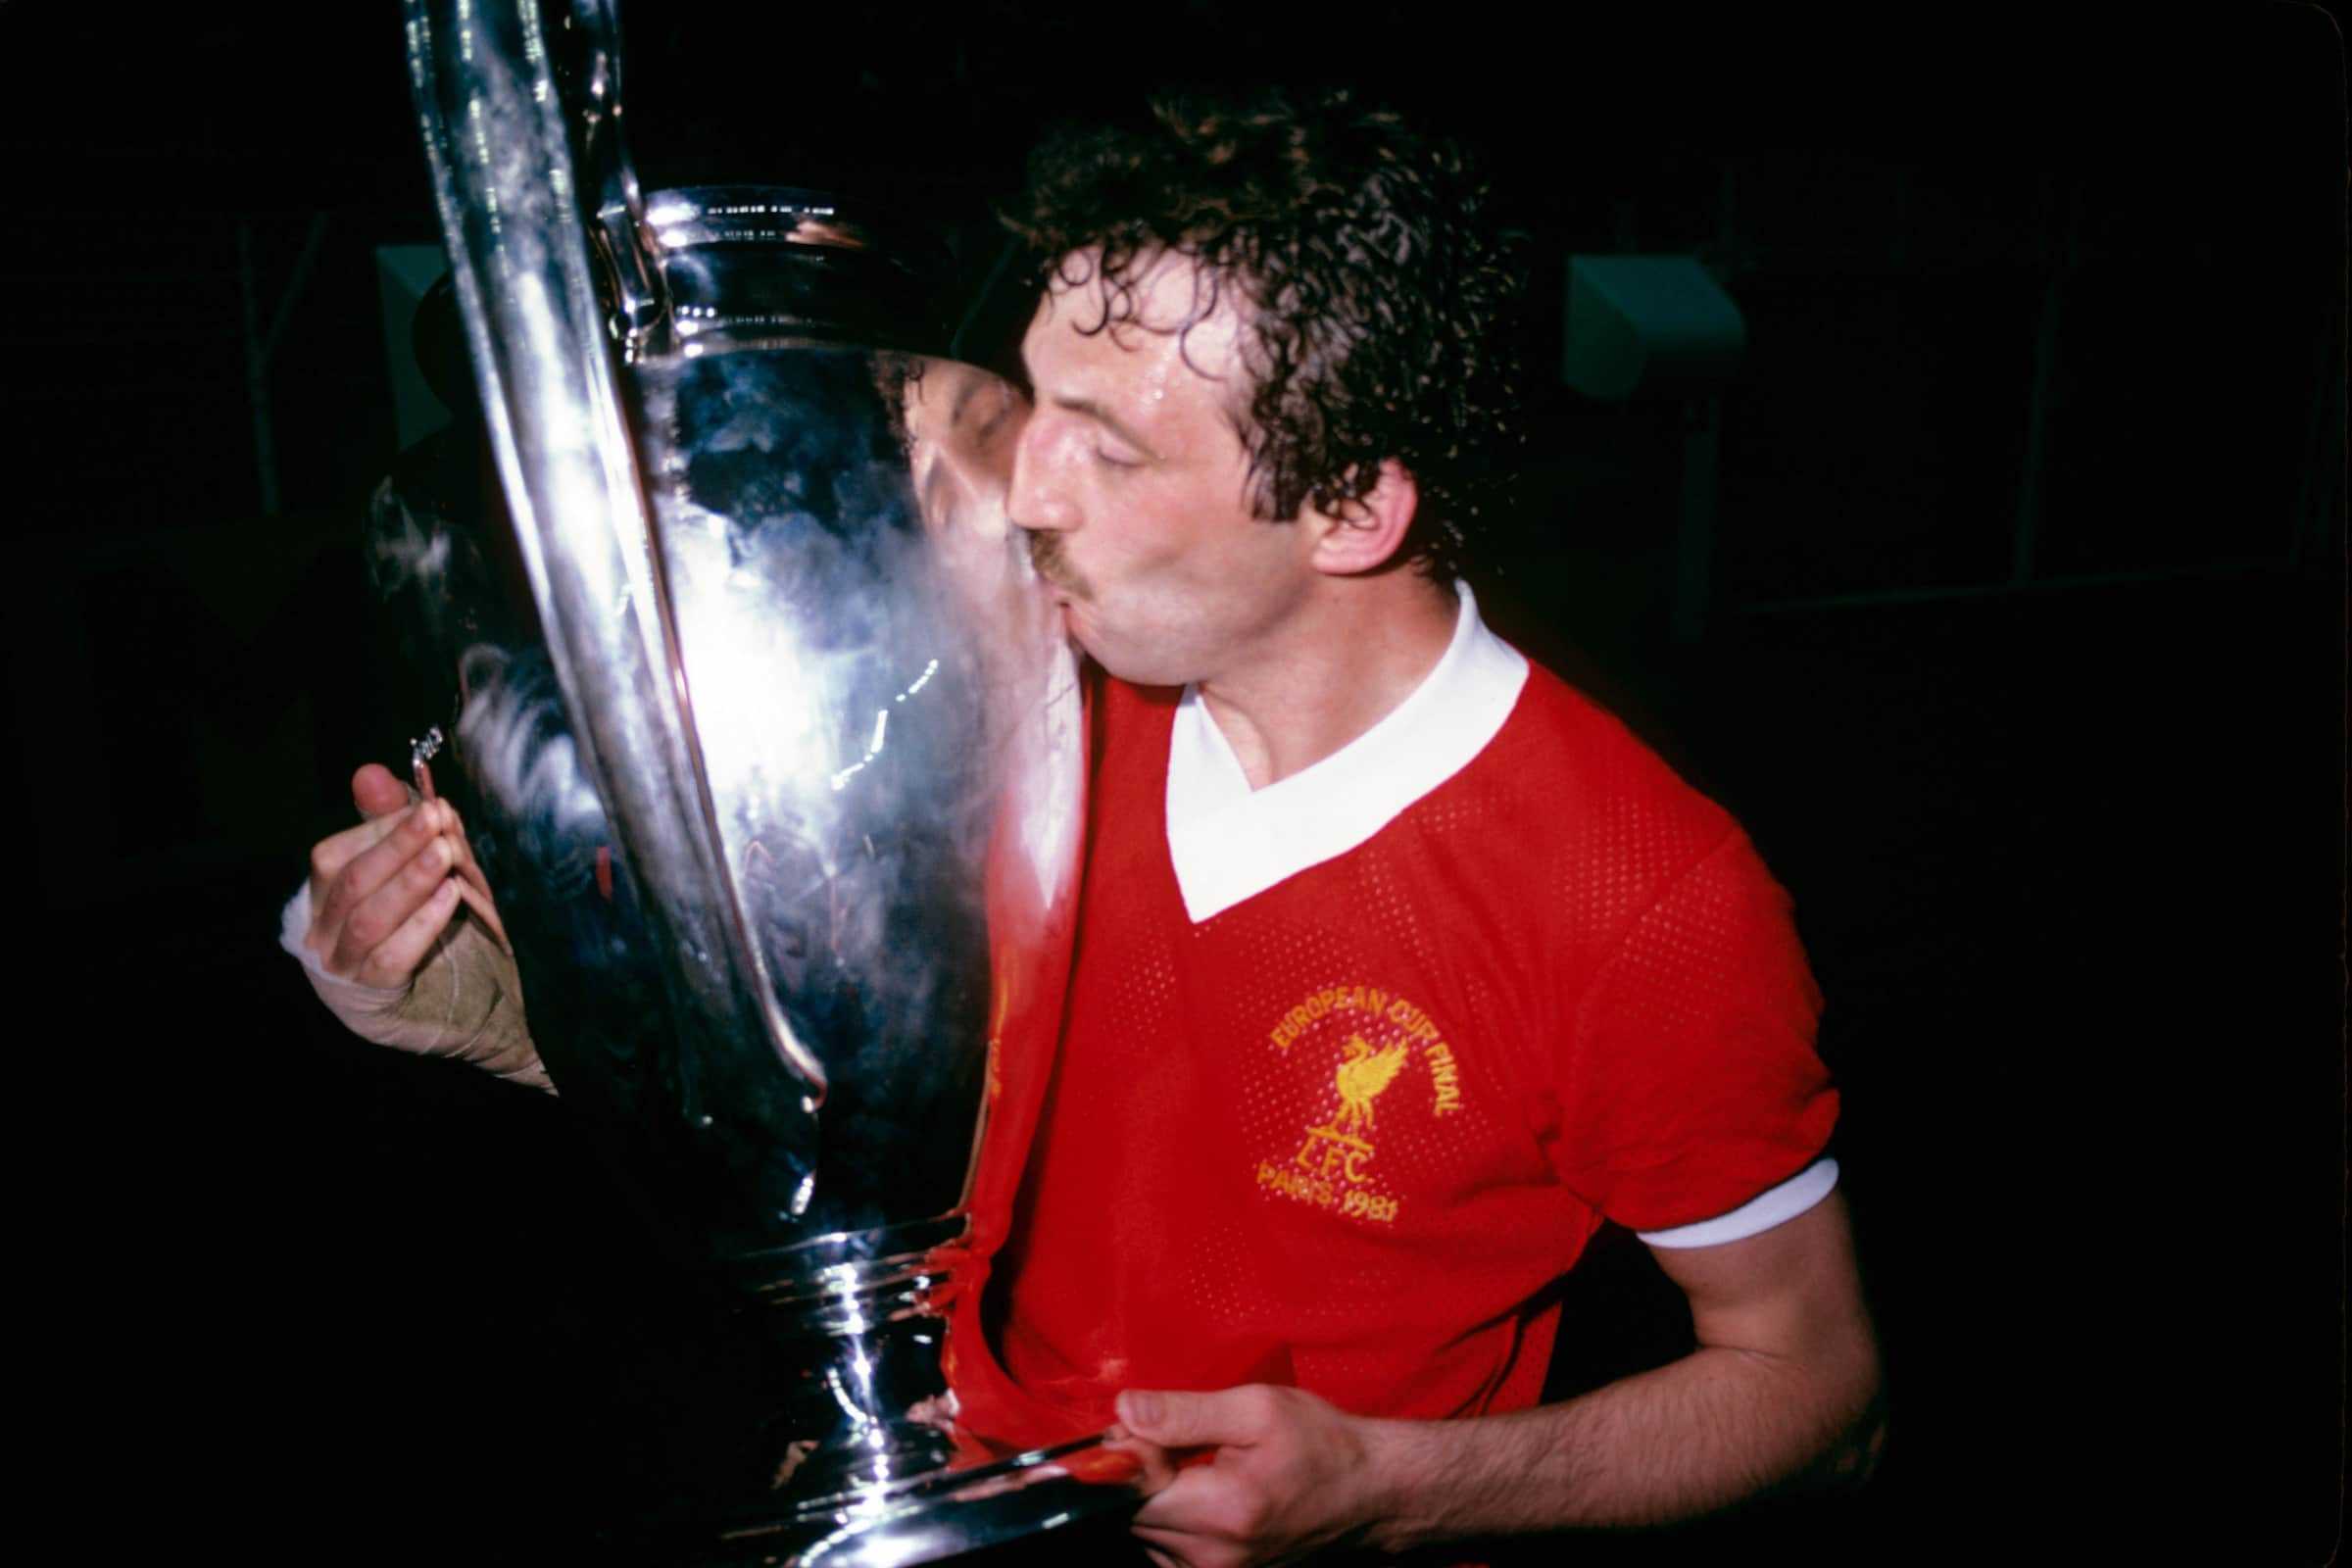 Liverpool's winning goalscorer Alan Kennedy celebrates with the European Cup